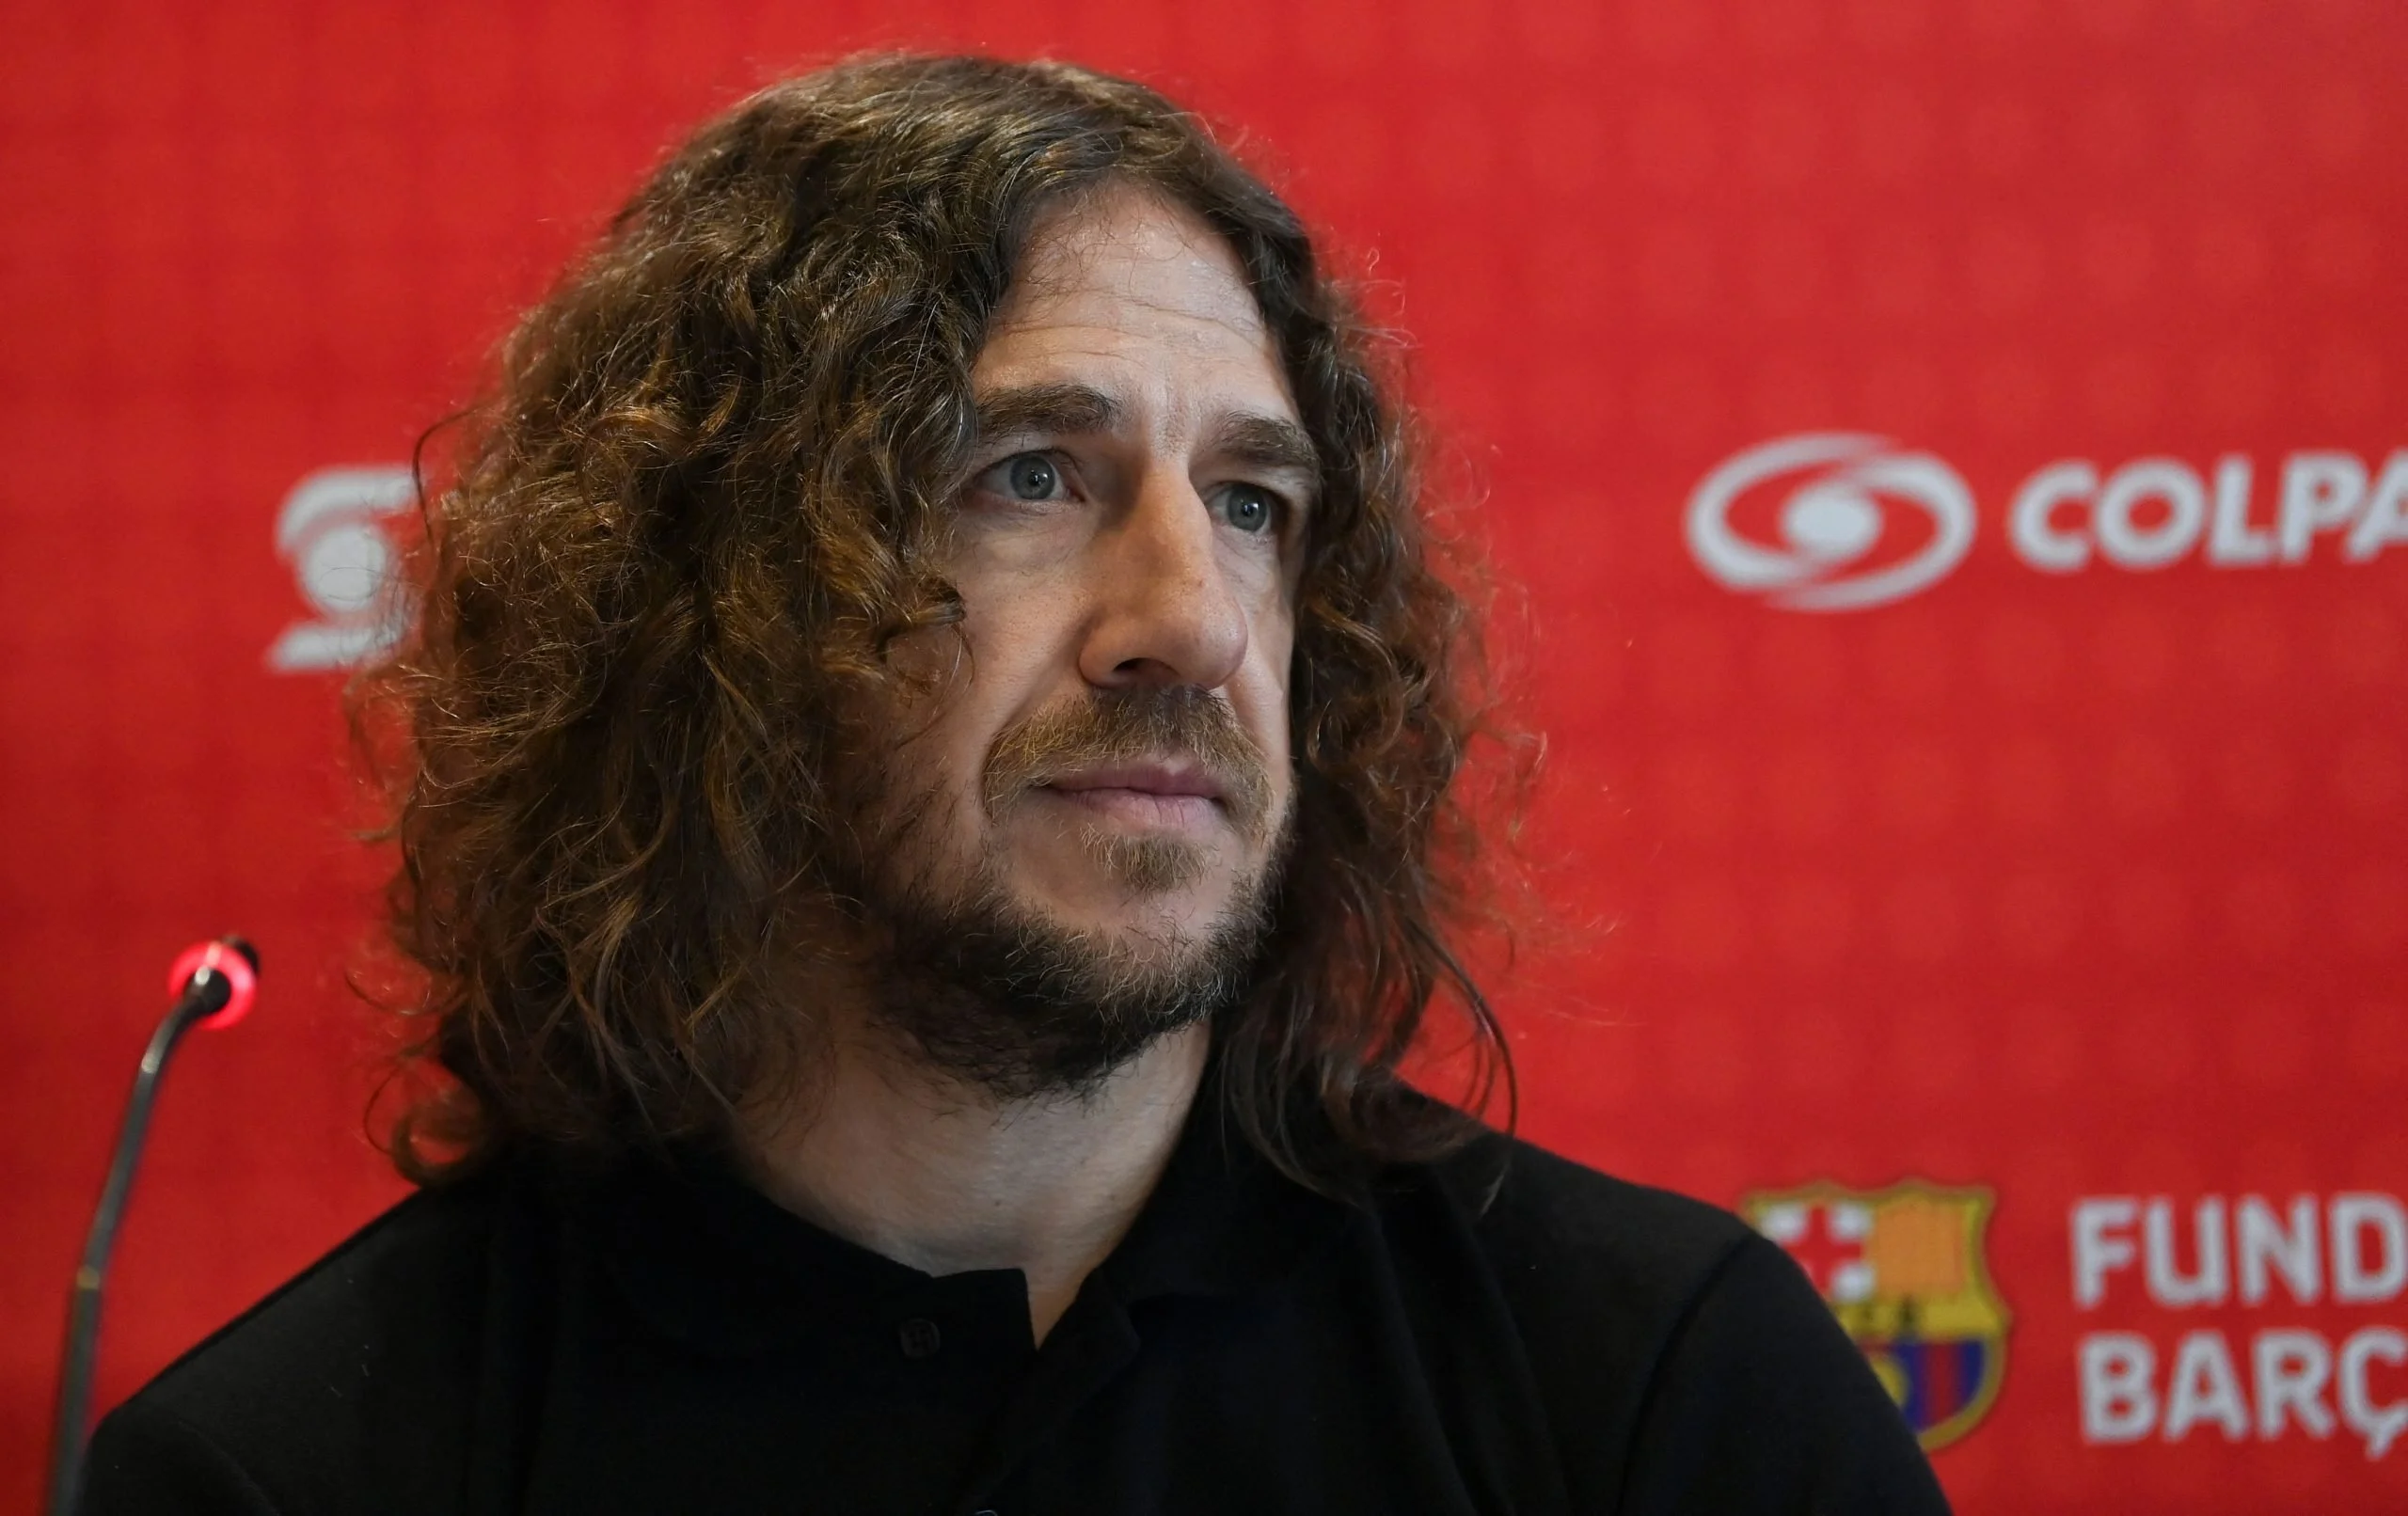 Barcelona legend Carles Puyol sends Gavi message about his injury recovery